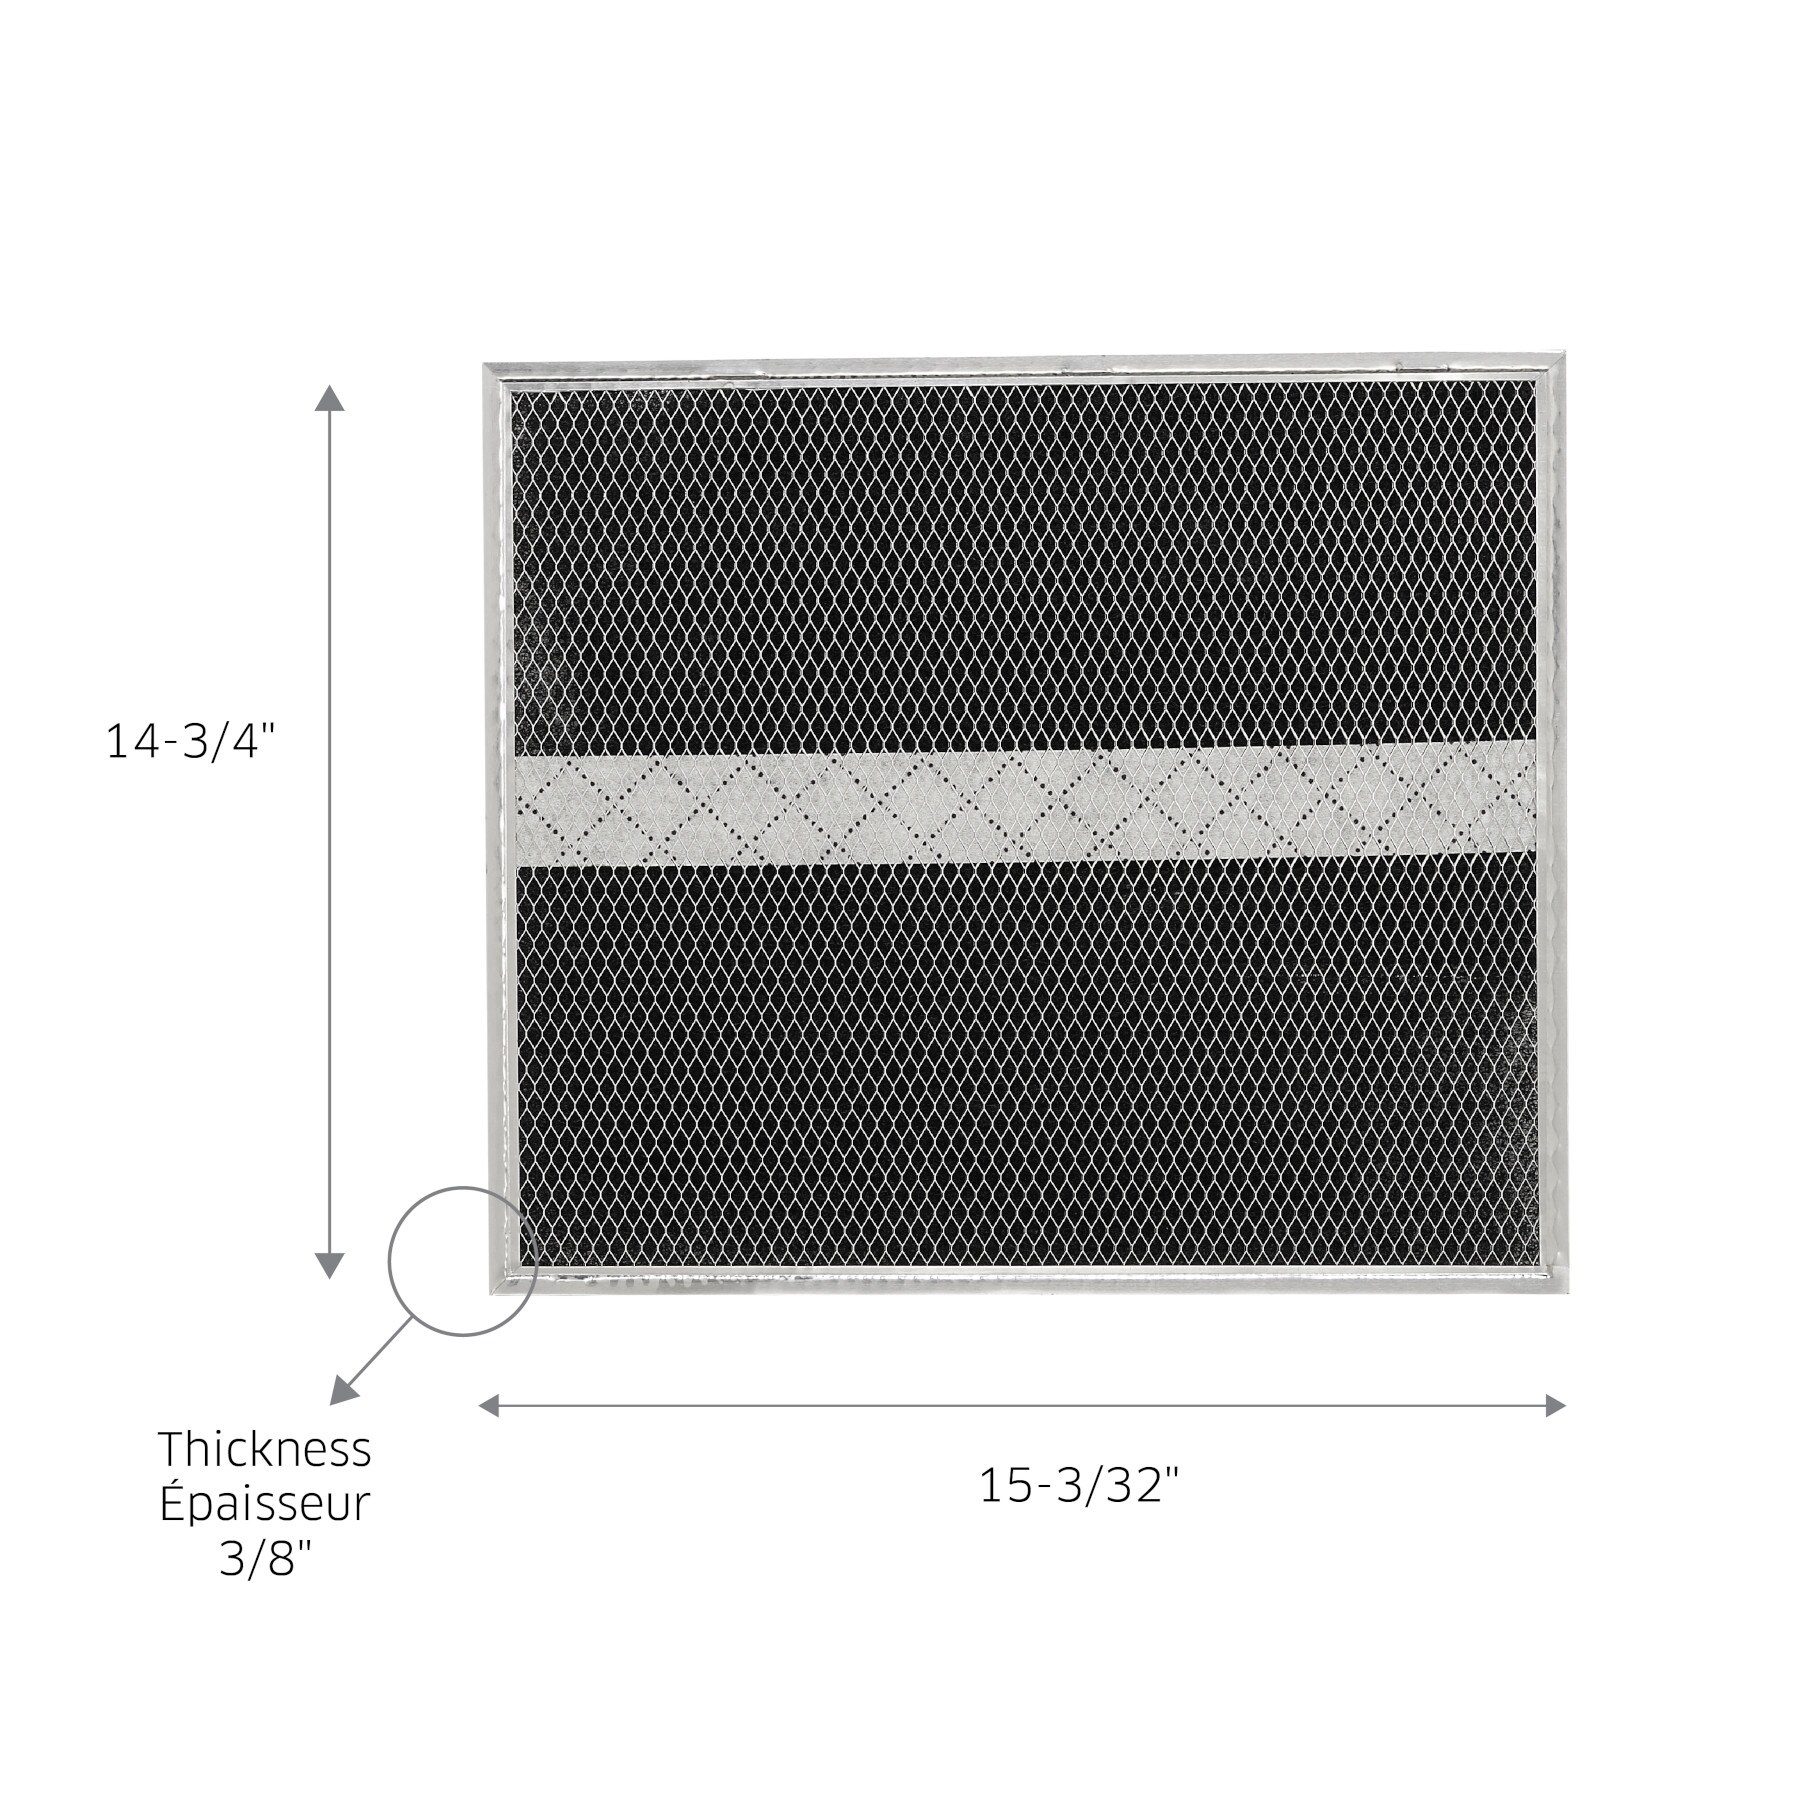  GOYMFK Carbon Cloth Filter, Non Woven Carbon Filters Sheet,  Adjustable Fabric Replacement Range Hood Filters, Charcoal Filter Sheets,  Range Hood Aluminum Filter Perfect for Fan Filter Kitchen Tools : Home 